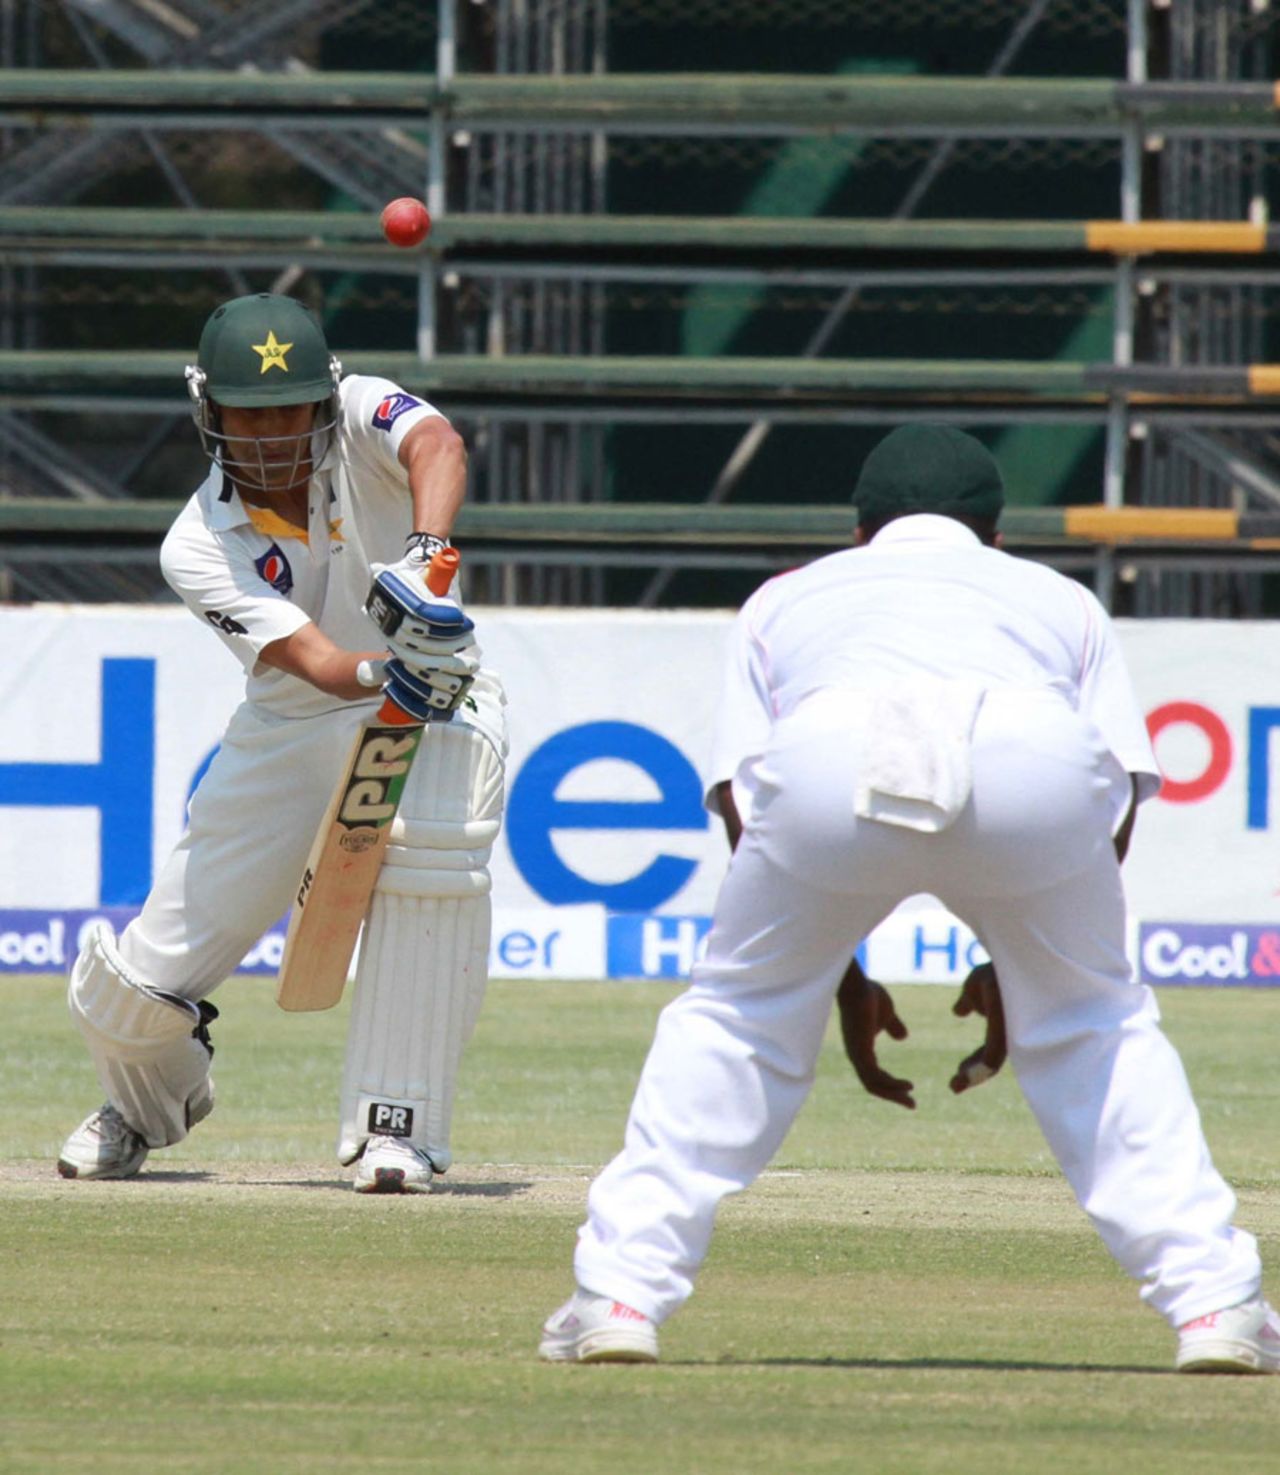 Younis Khan defends the ball, Zimbabwe v Pakistan, 2nd Test, Harare, 3rd day, September 12, 2013